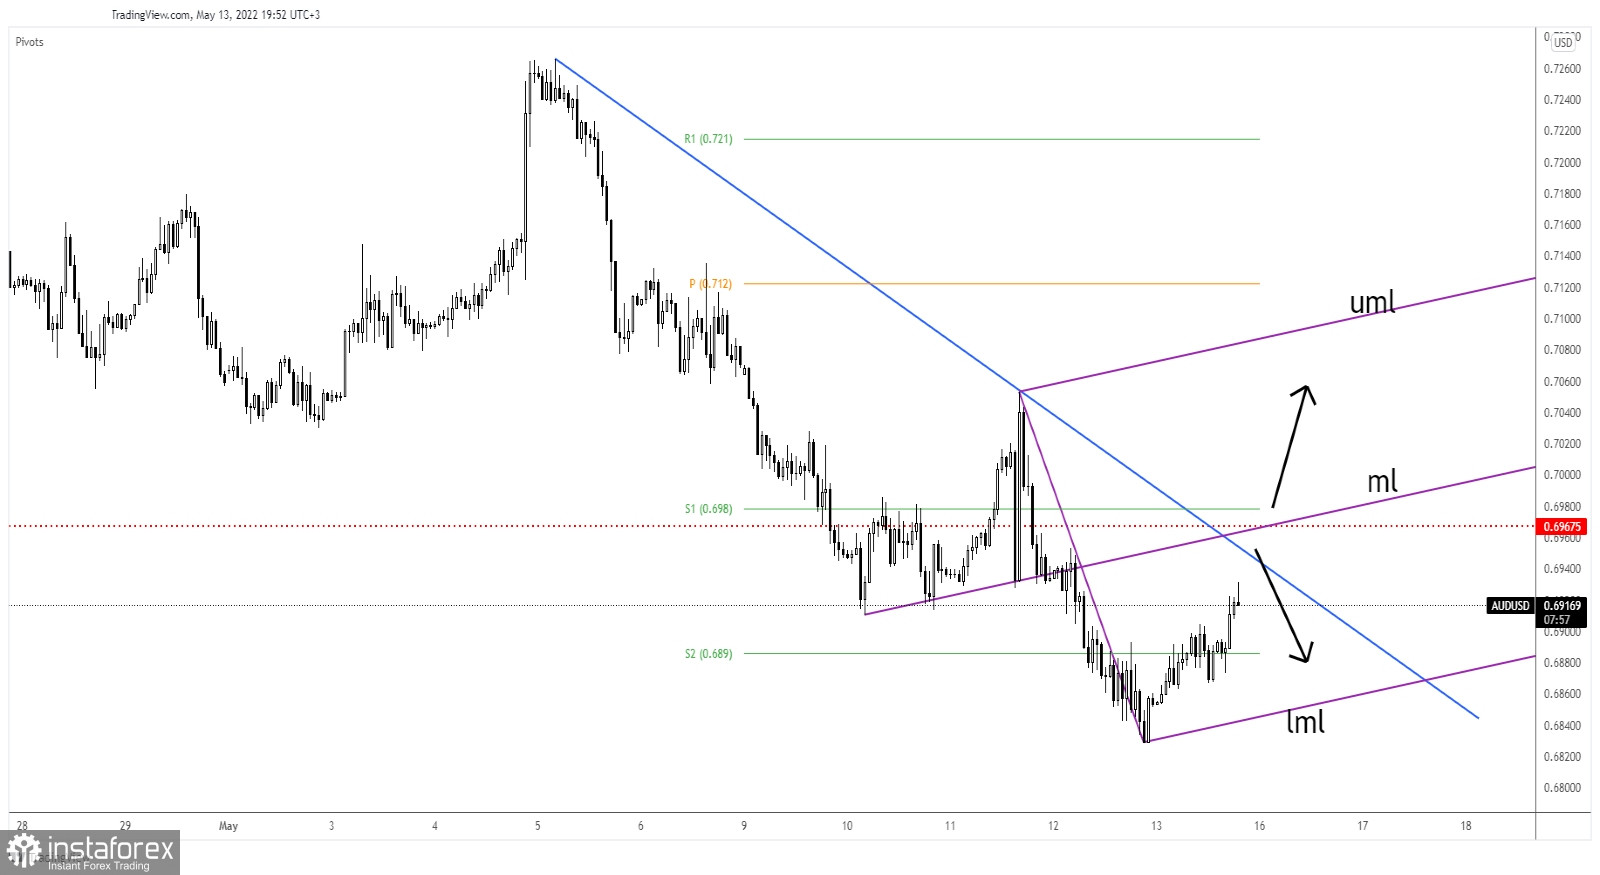 AUD/USD: could it make larger rebound?